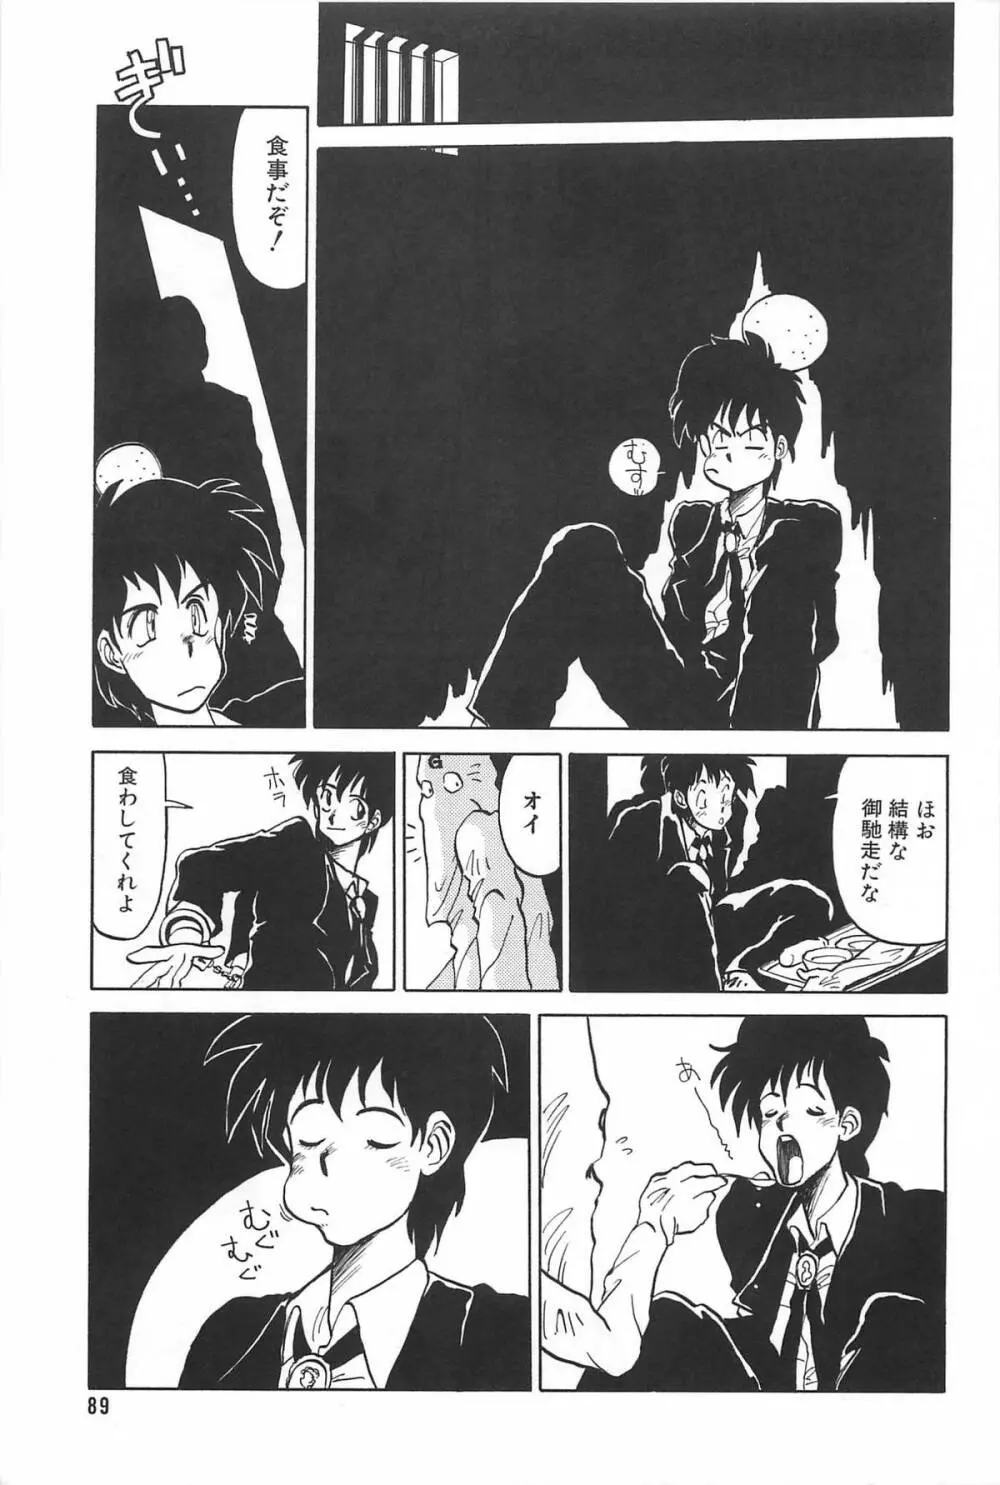 LOVE ME 1995 Page.91